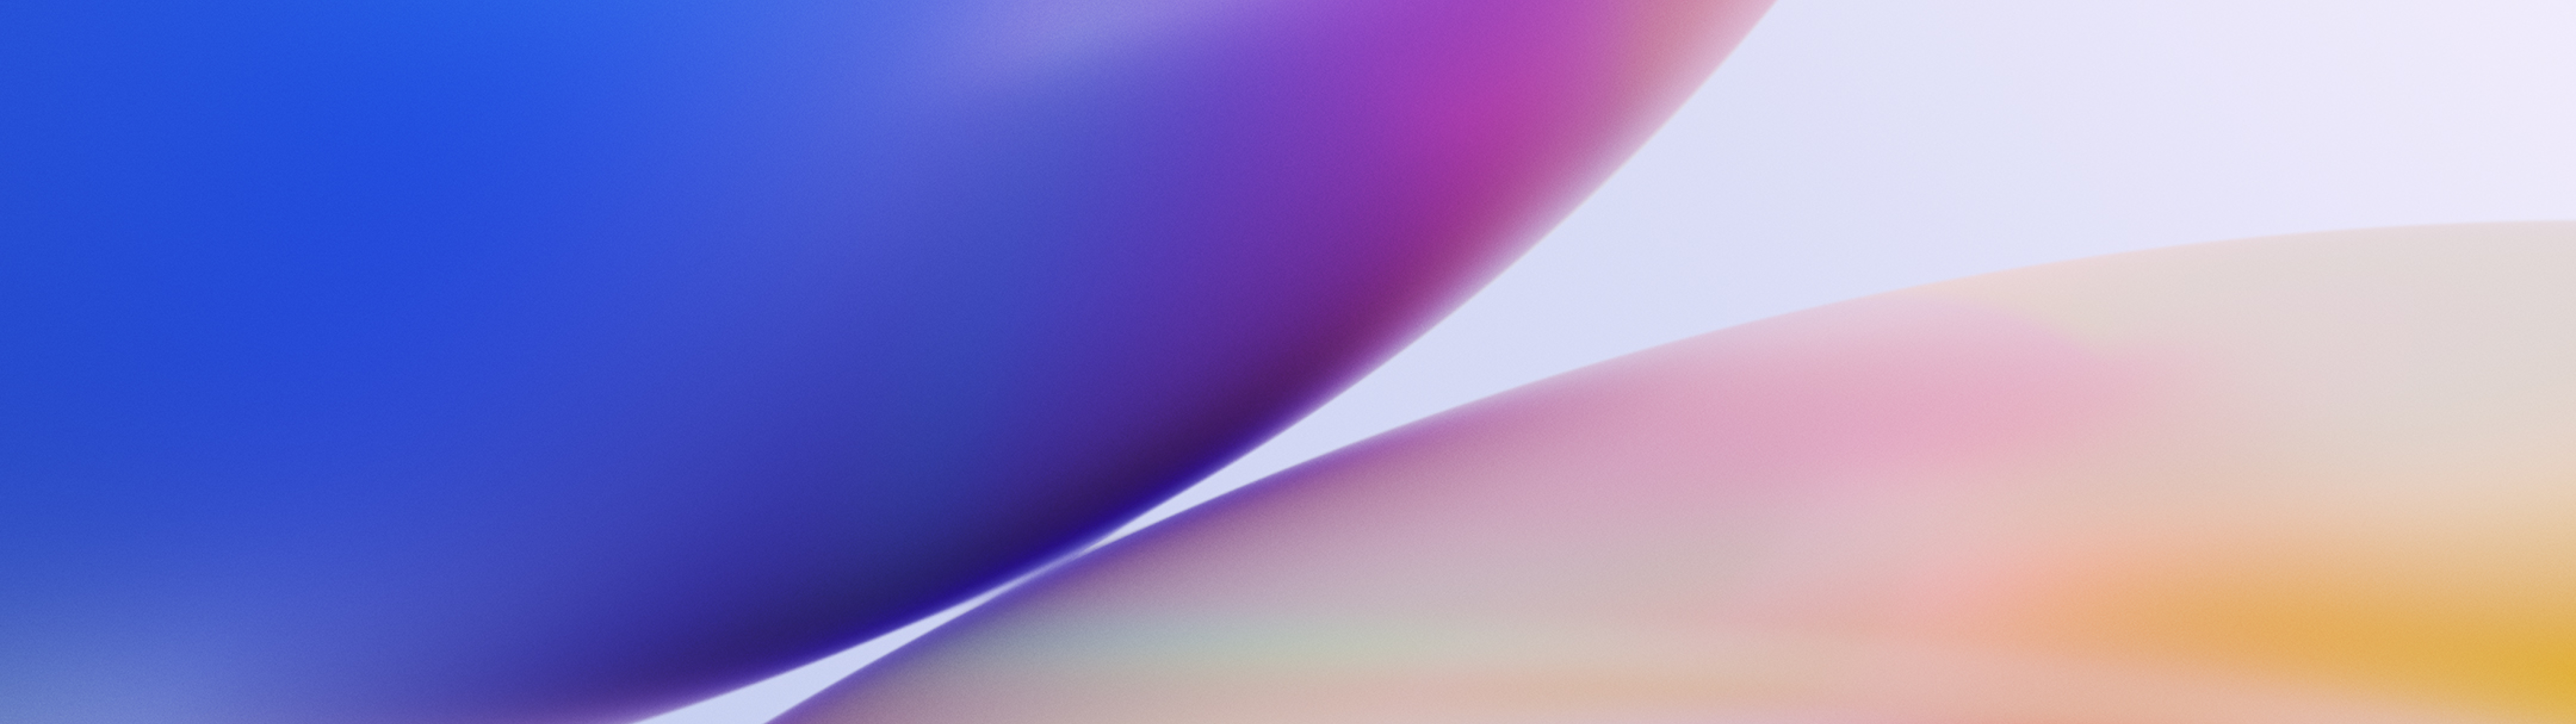 5120x1440 OnePlus 8 Pro 5120x1440 Resolution Wallpaper, HD Abstract 4K  Wallpapers, Images, Photos and Background - Wallpapers Den